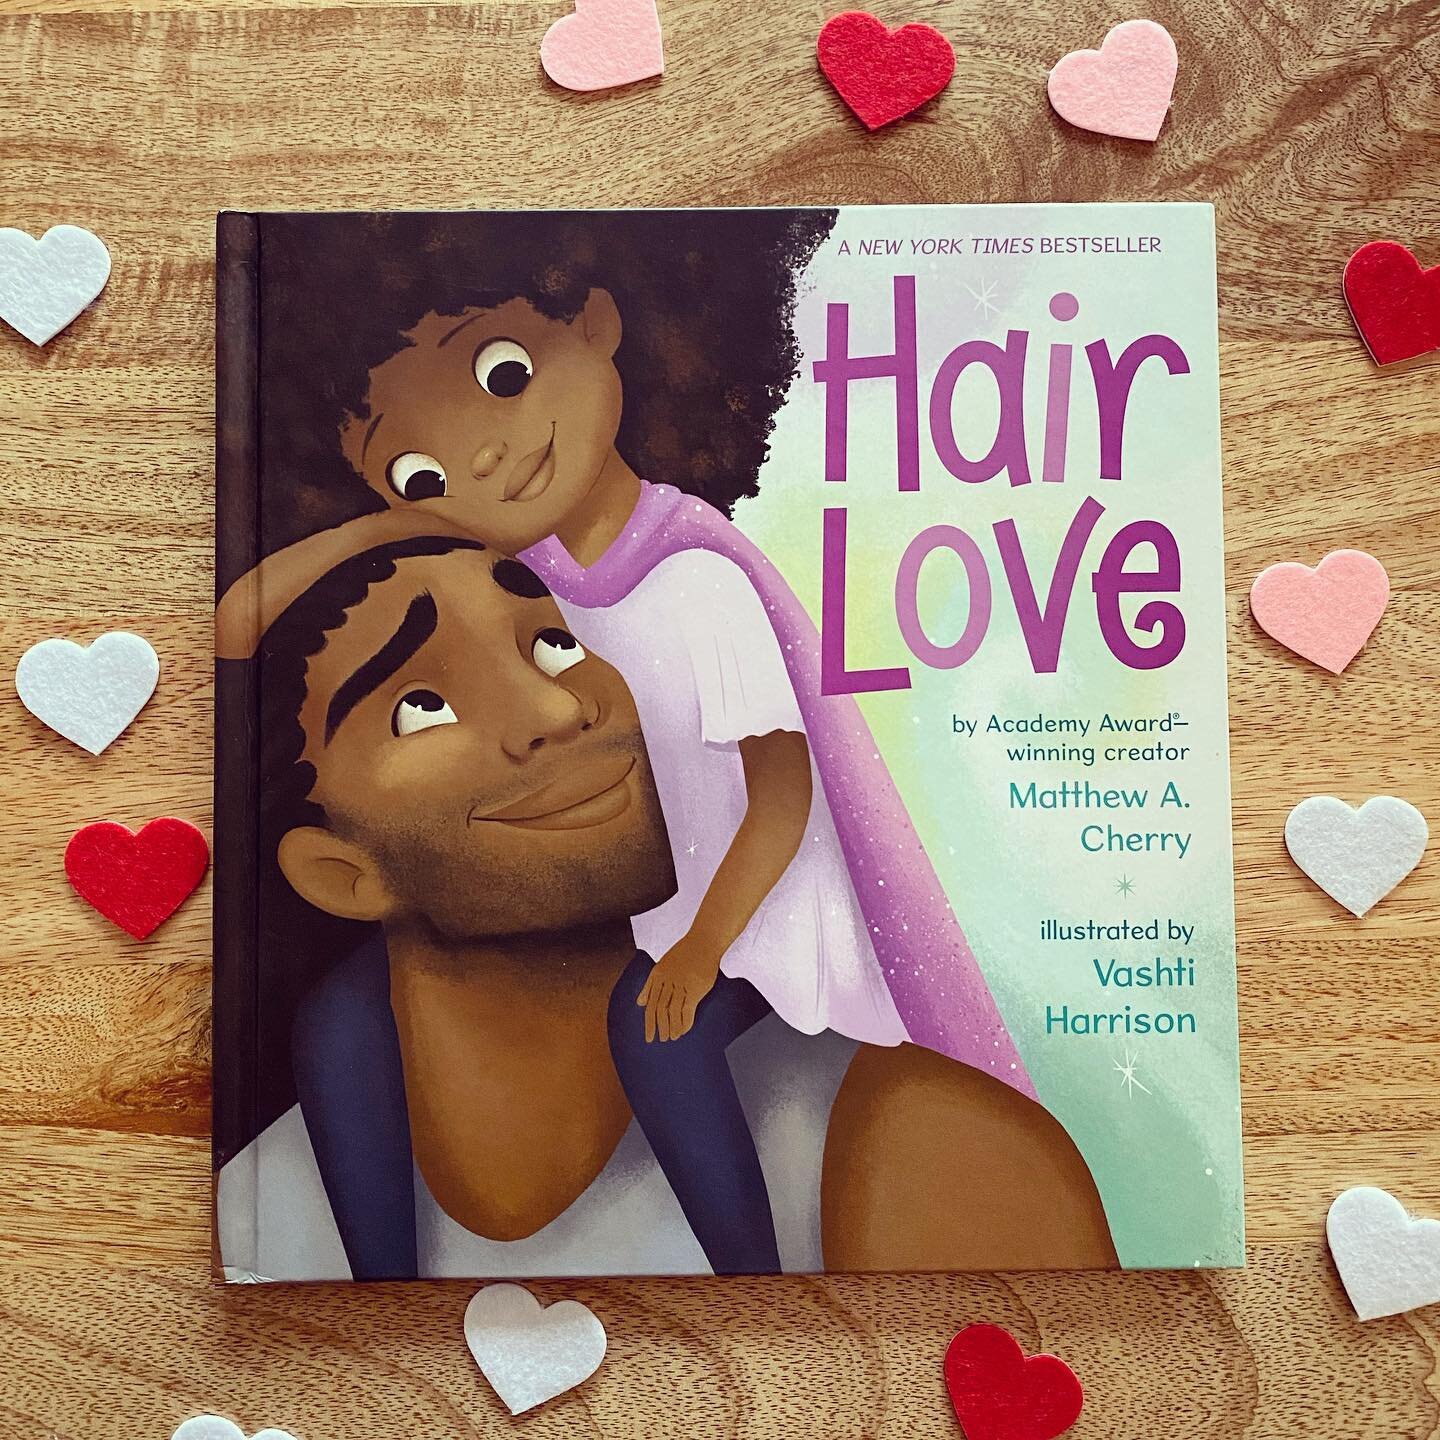 Valentine&rsquo;s Day x Black History Month Book Reccomendation! Hair Love, by Matthew A. Cherry and illustrated by @vashtiharrison, a book celebrating black hair and the love of family is heart warming! After we read it the first time Frankie wanted